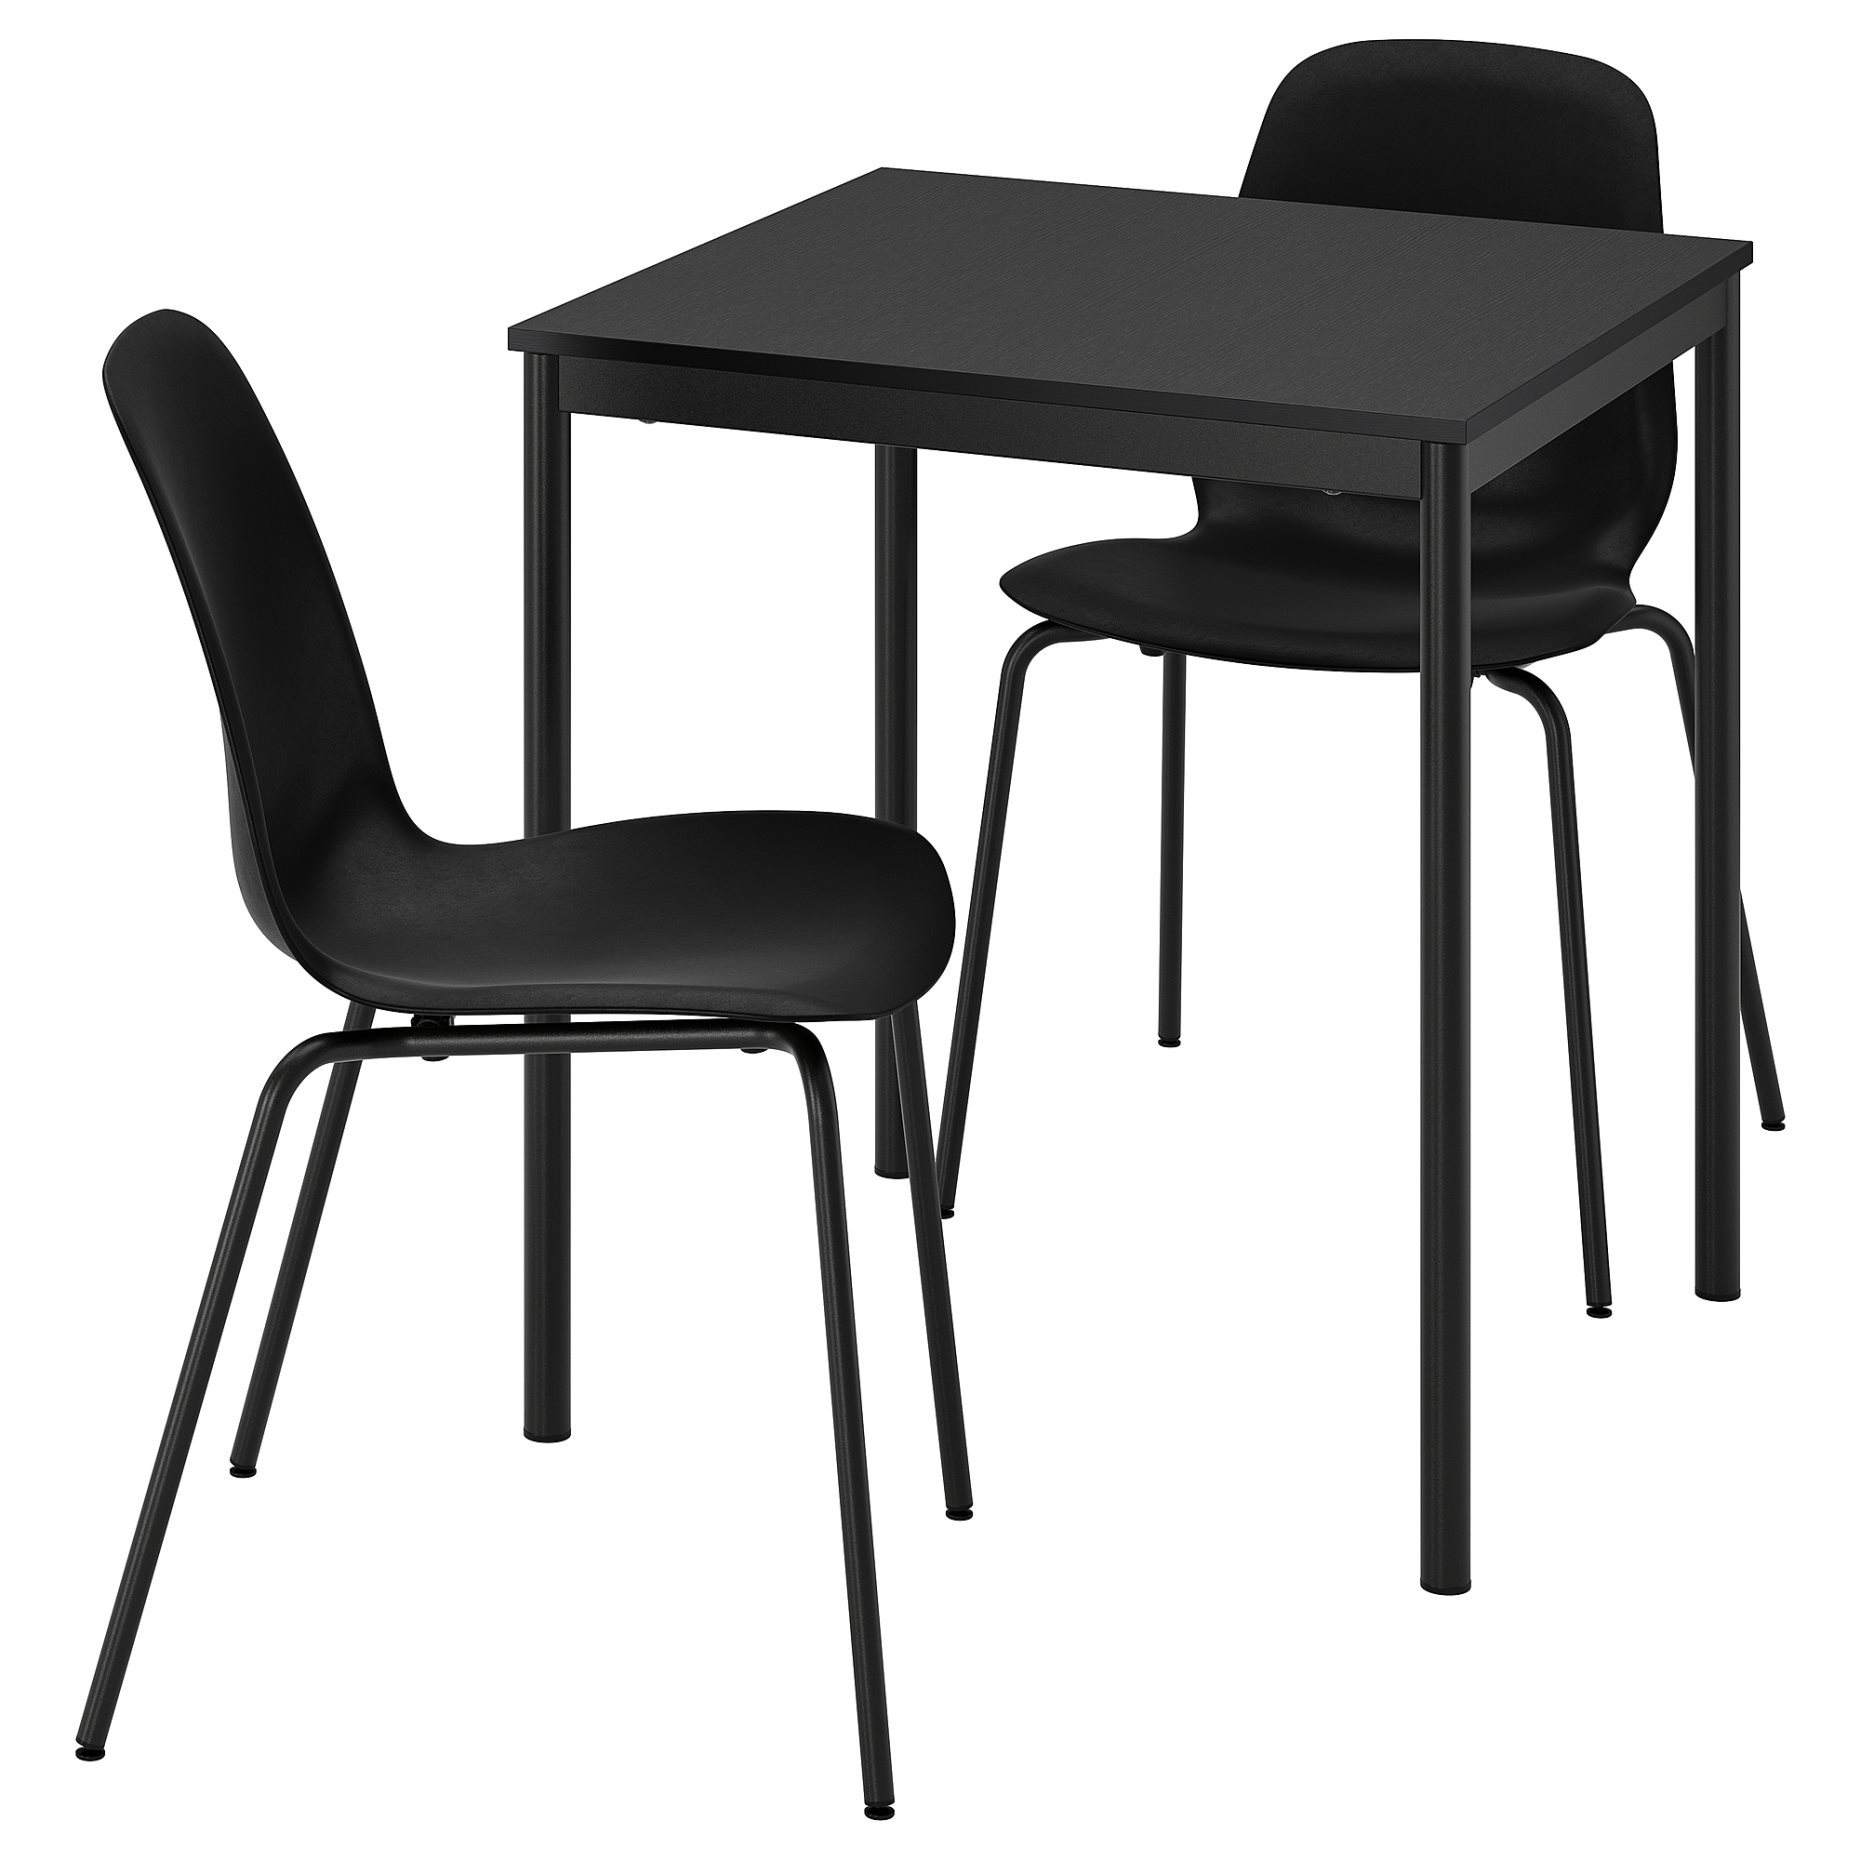 SANDSBERG/LIDAS, table and 2 chairs, 67x67 cm, 795.088.97